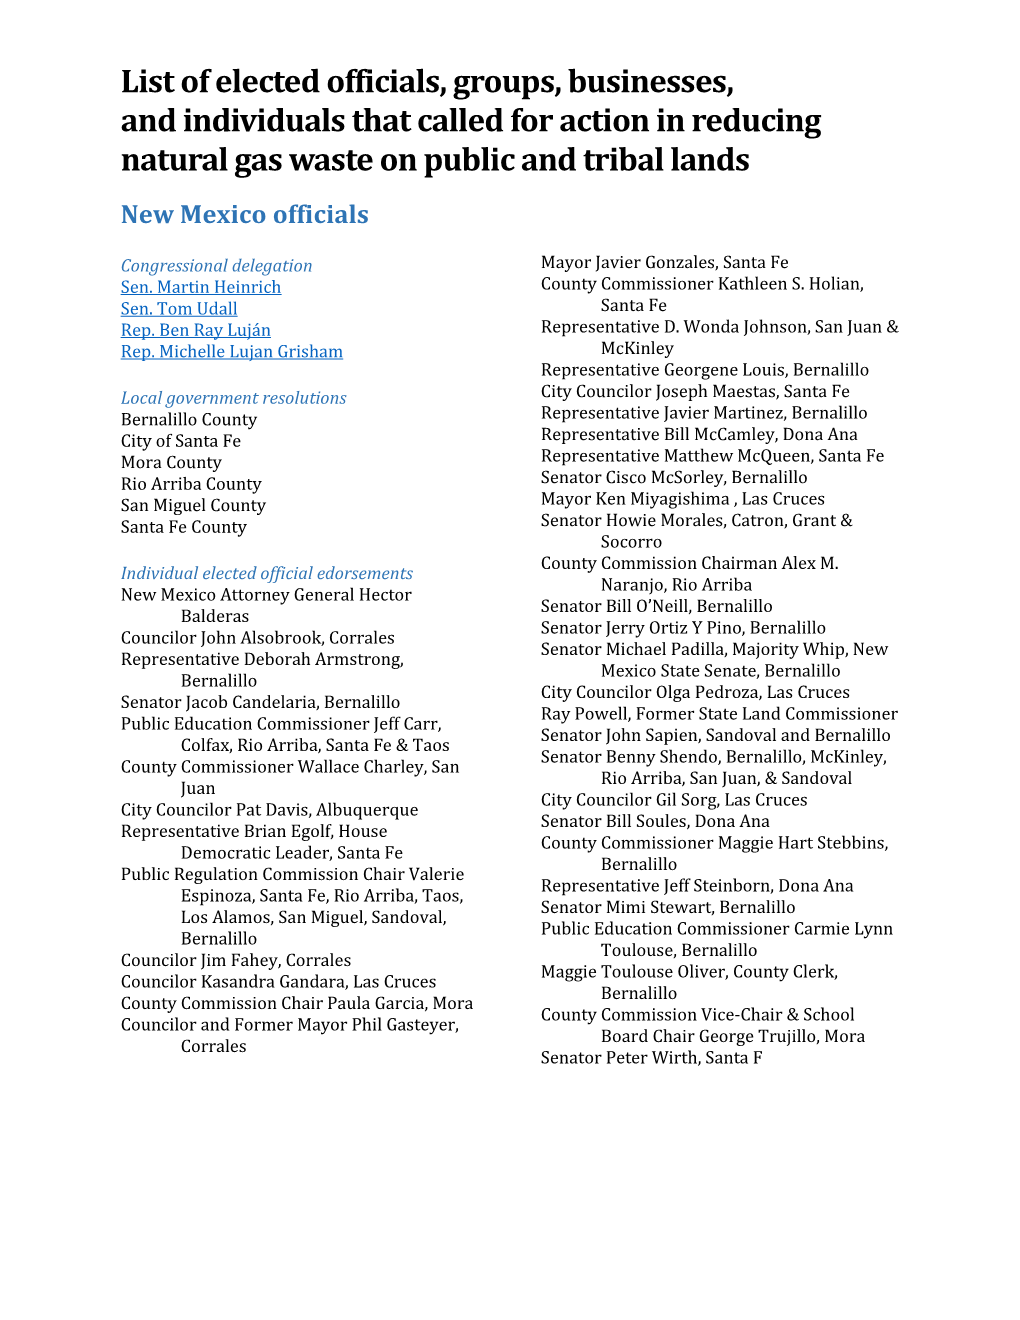 List of Elected Officials, Groups, Businesses, and Individuals That Called for Action in Reducing Natural Gas Waste on Public and Tribal Lands New Mexico Officials